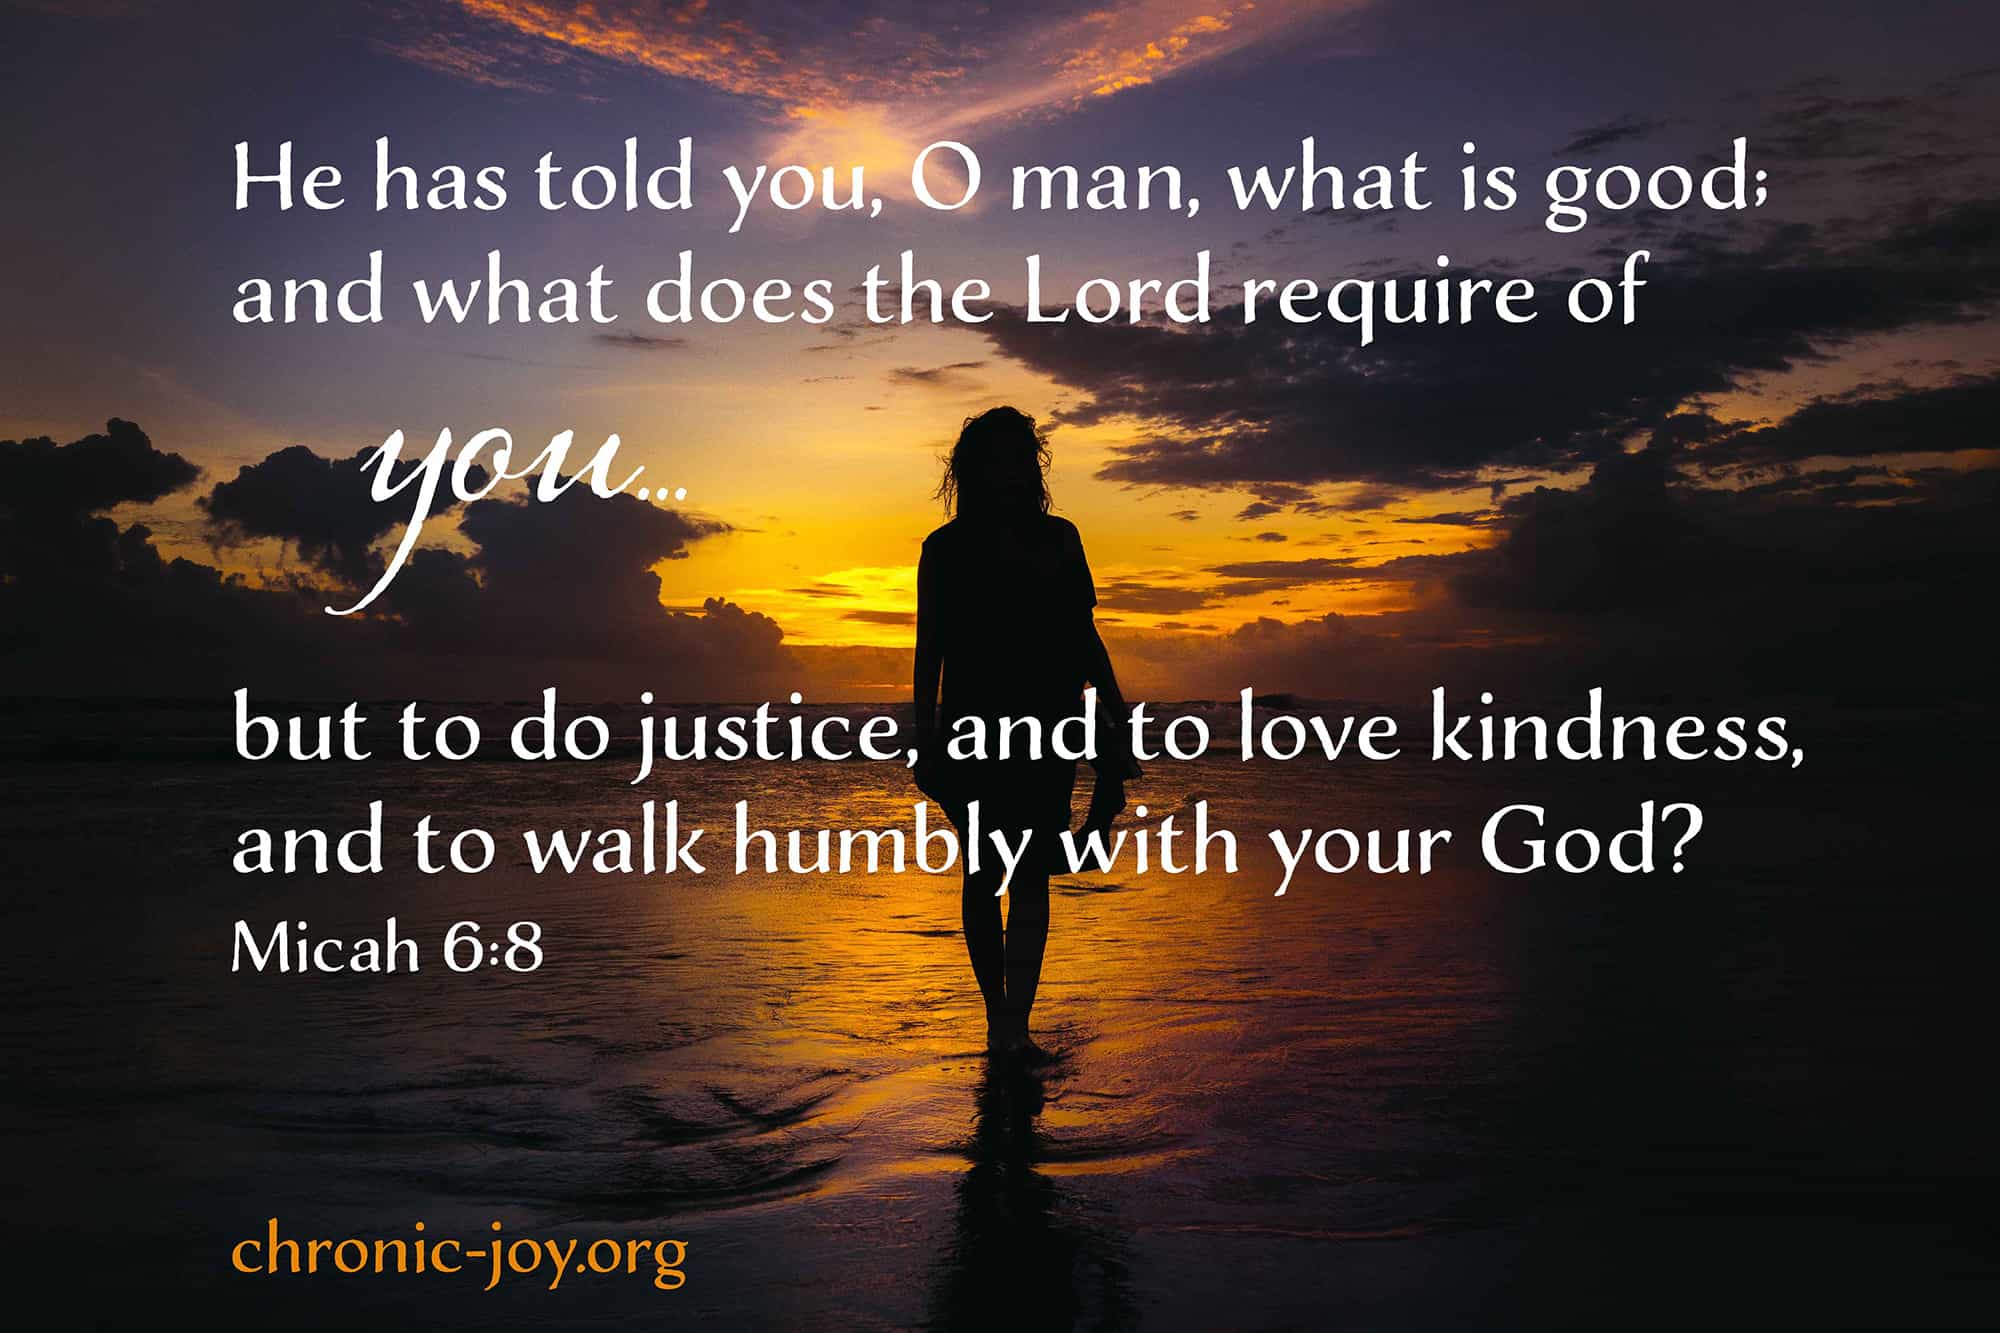 He has told you, O man, what is good; and what does the Lord require of you but to do justice, and to love kindness, and to walk humbly with your God? (Micah 6:8)